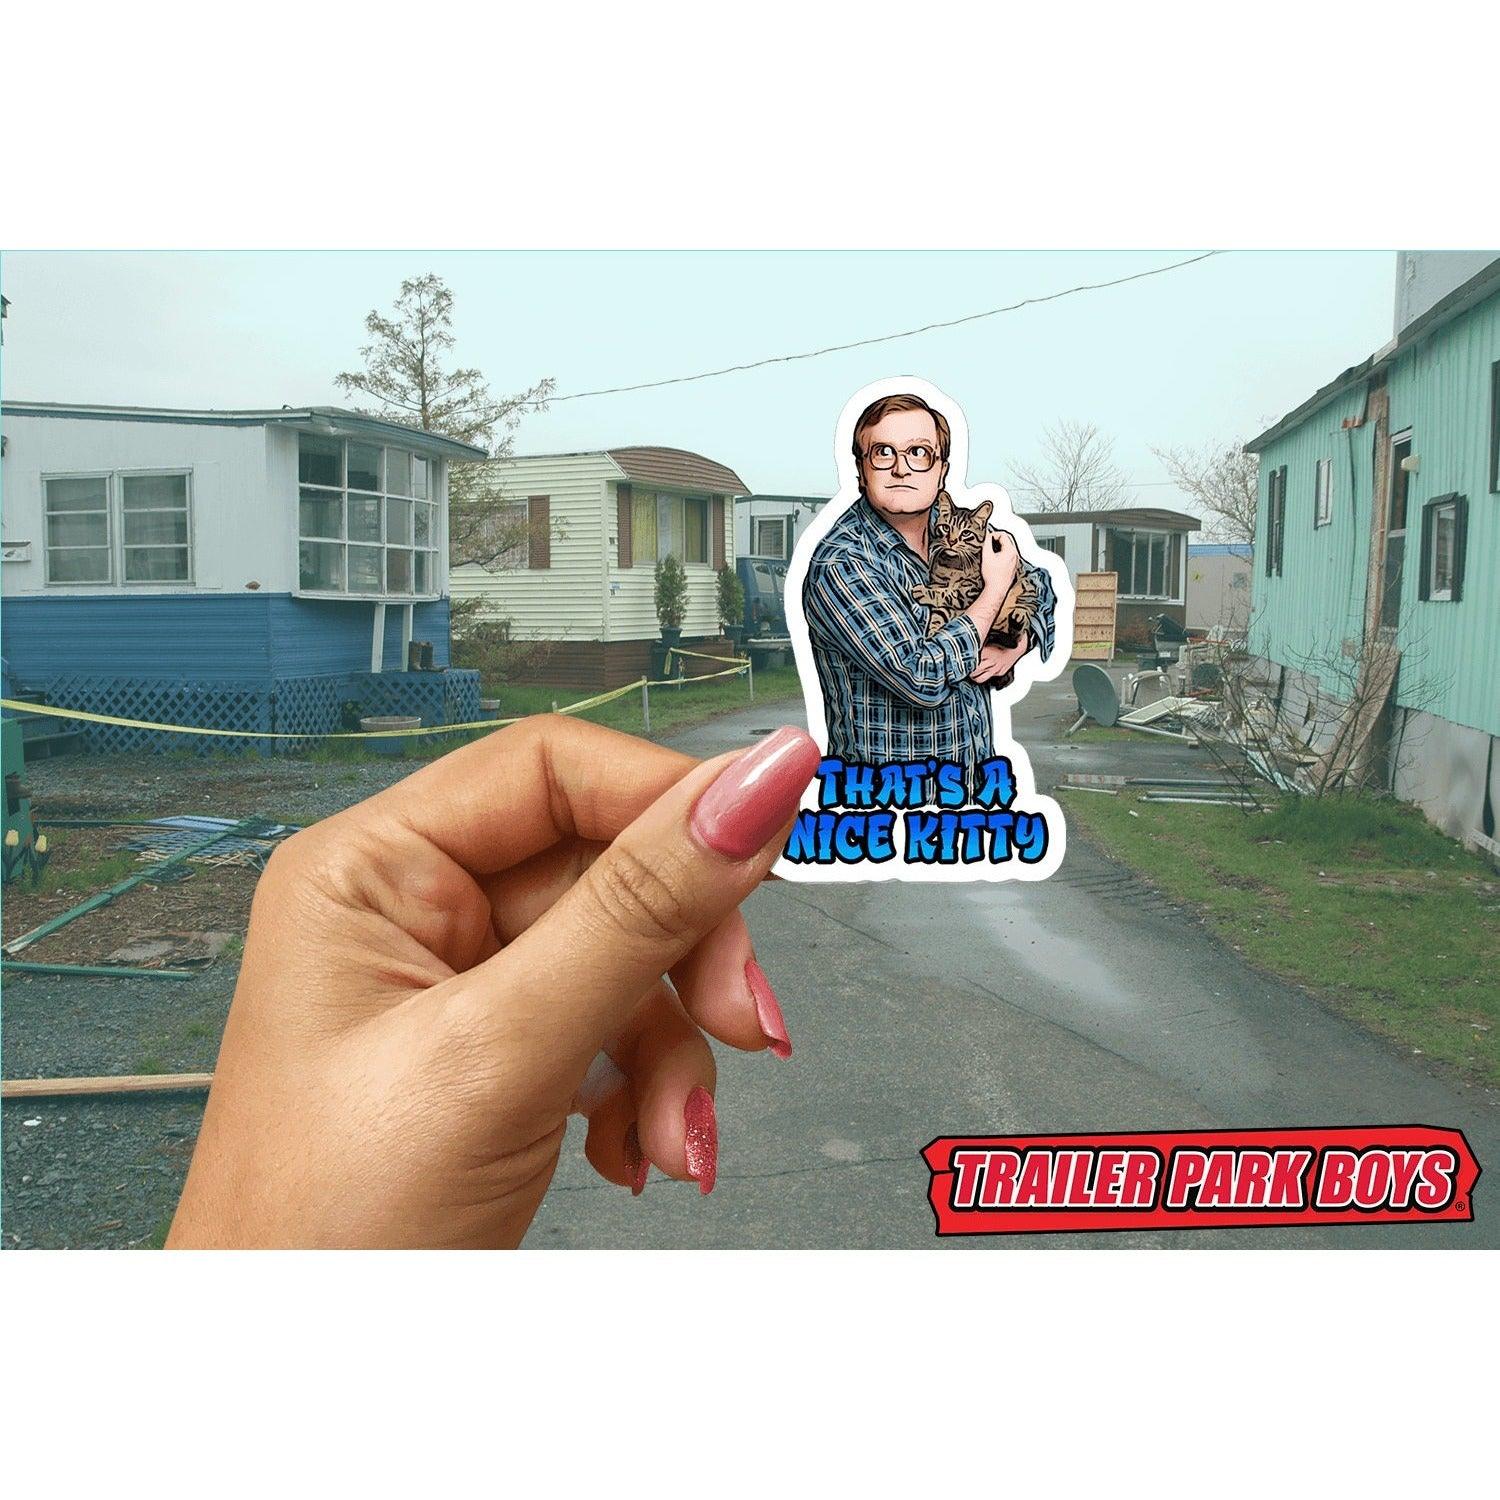 Trailer Park Boys Bubbles Sticker | Officially Licensed Bubbles That's A Nice Kitty Sticker | Trailer Park Boys Bubbles Quotes with Glasses - Ottos Grotto :: Stickers For Your Stuff